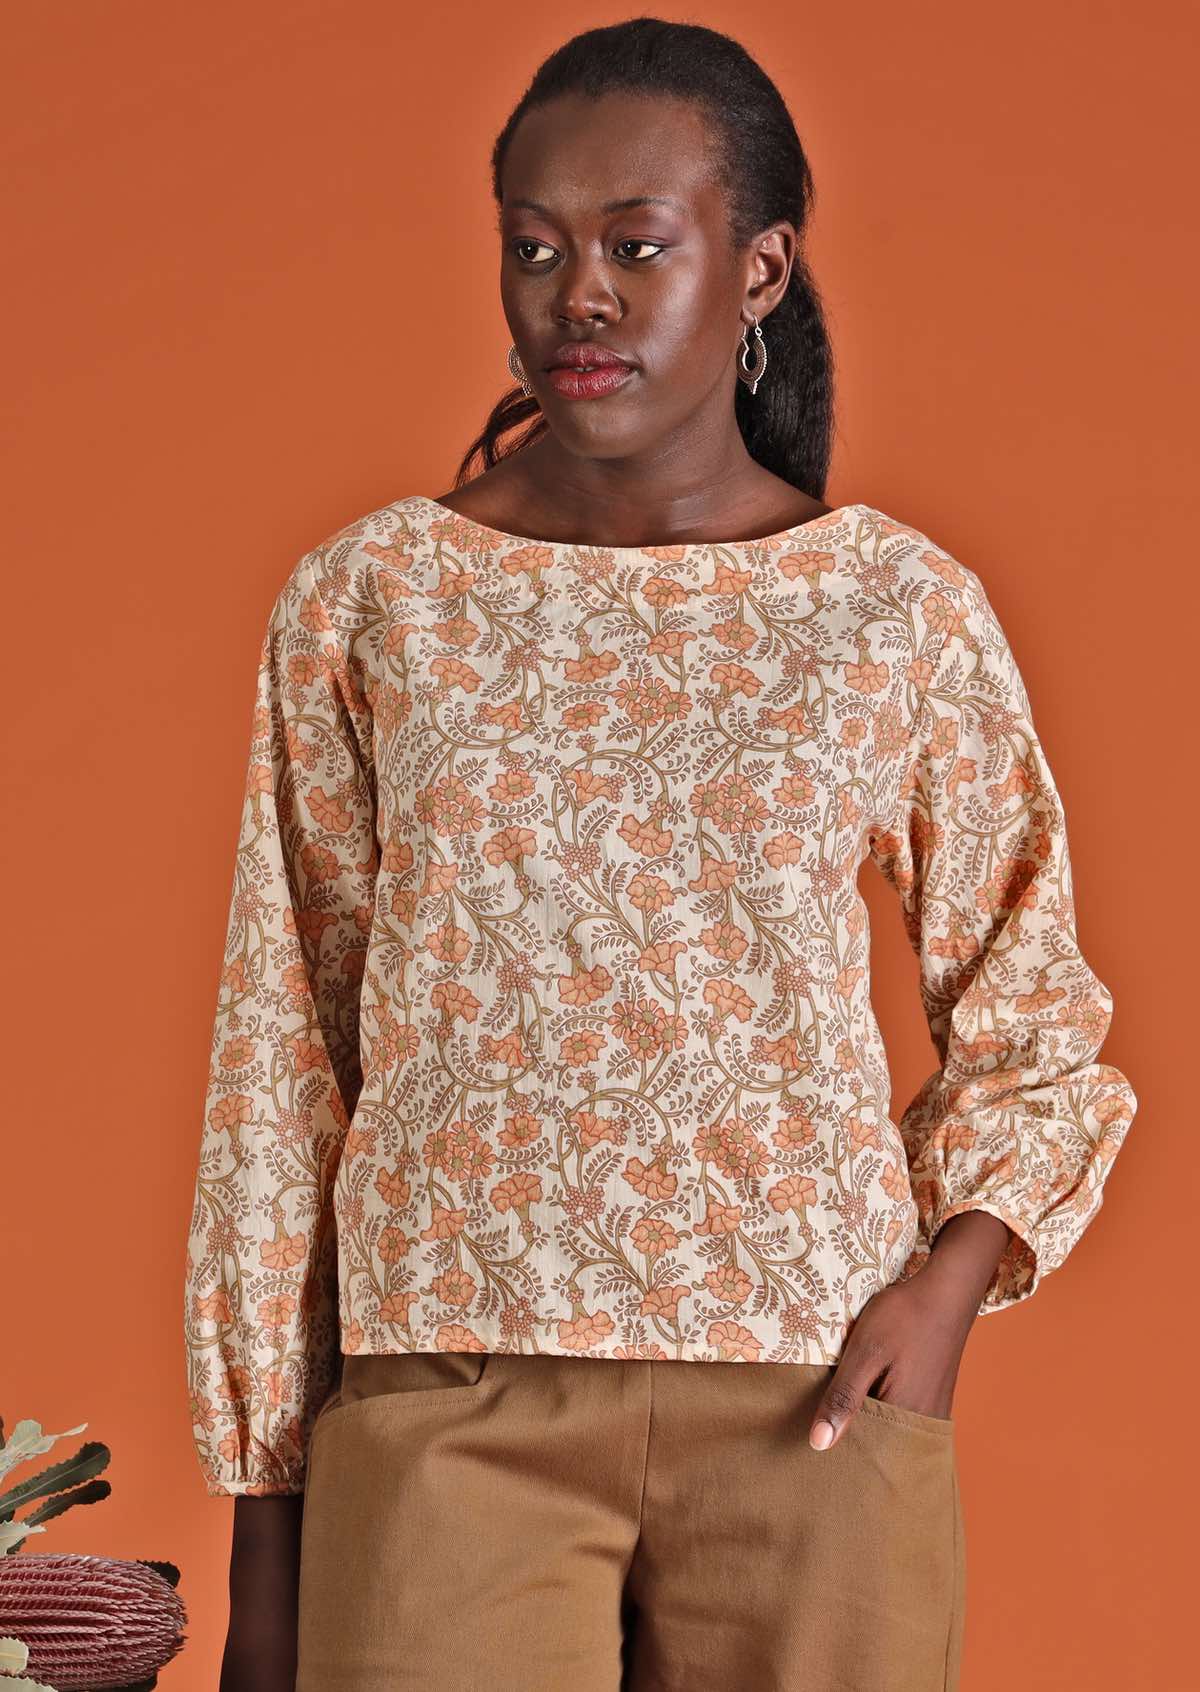 Model in cotton floral women's top, cream with apricot coloured flowers worn over cotton pants